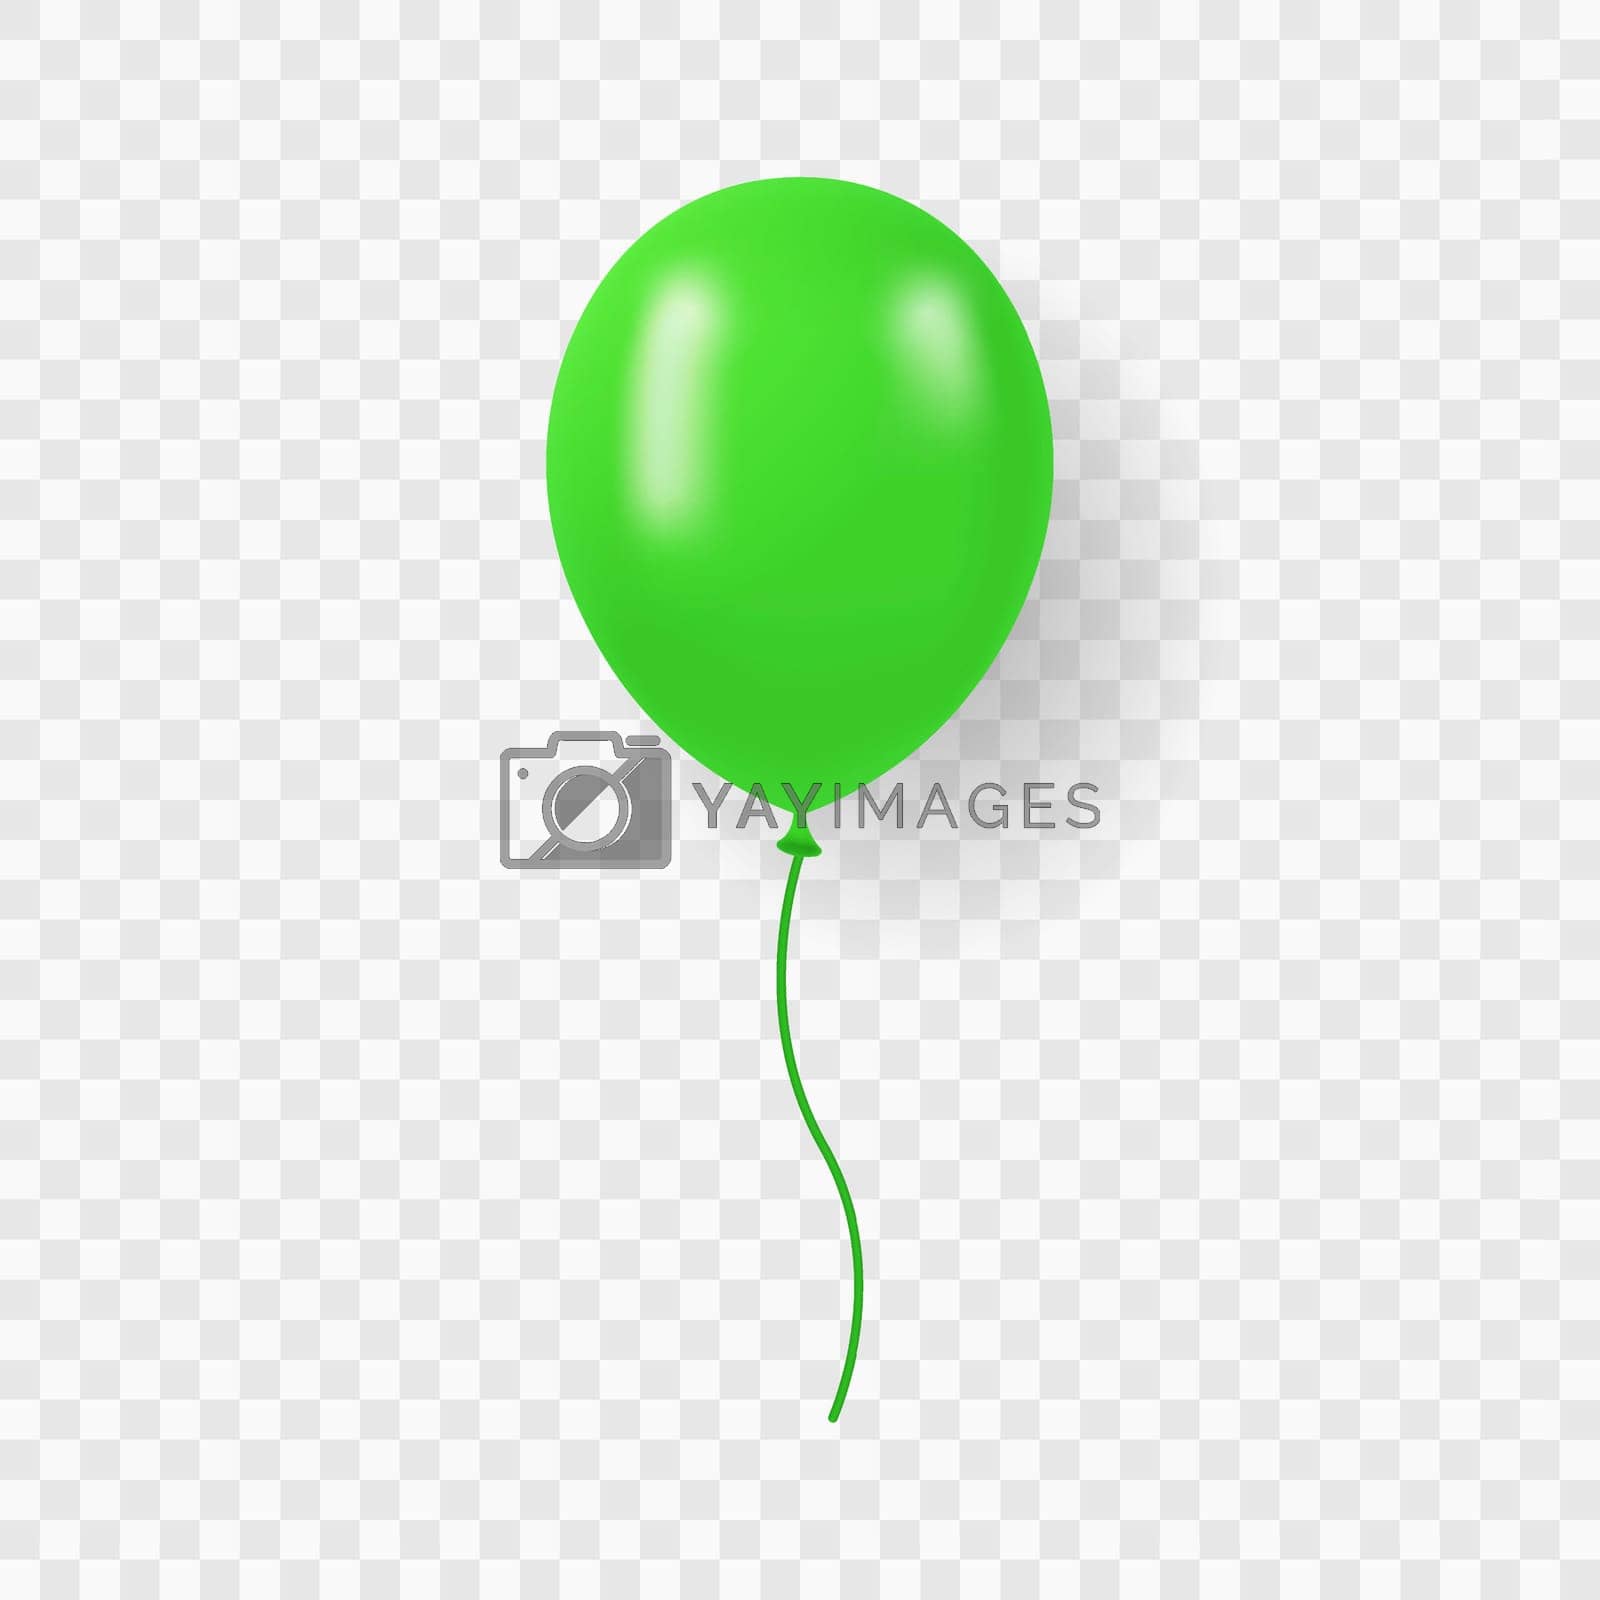 Royalty free image of Single Green Balloon with Ribbon on Transparent Background. Round Air Ball with String for Party, Birthday, Anniversary, Celebration. Green Realistic Ballon. Isolated Vector Illustration by Toxa2x2